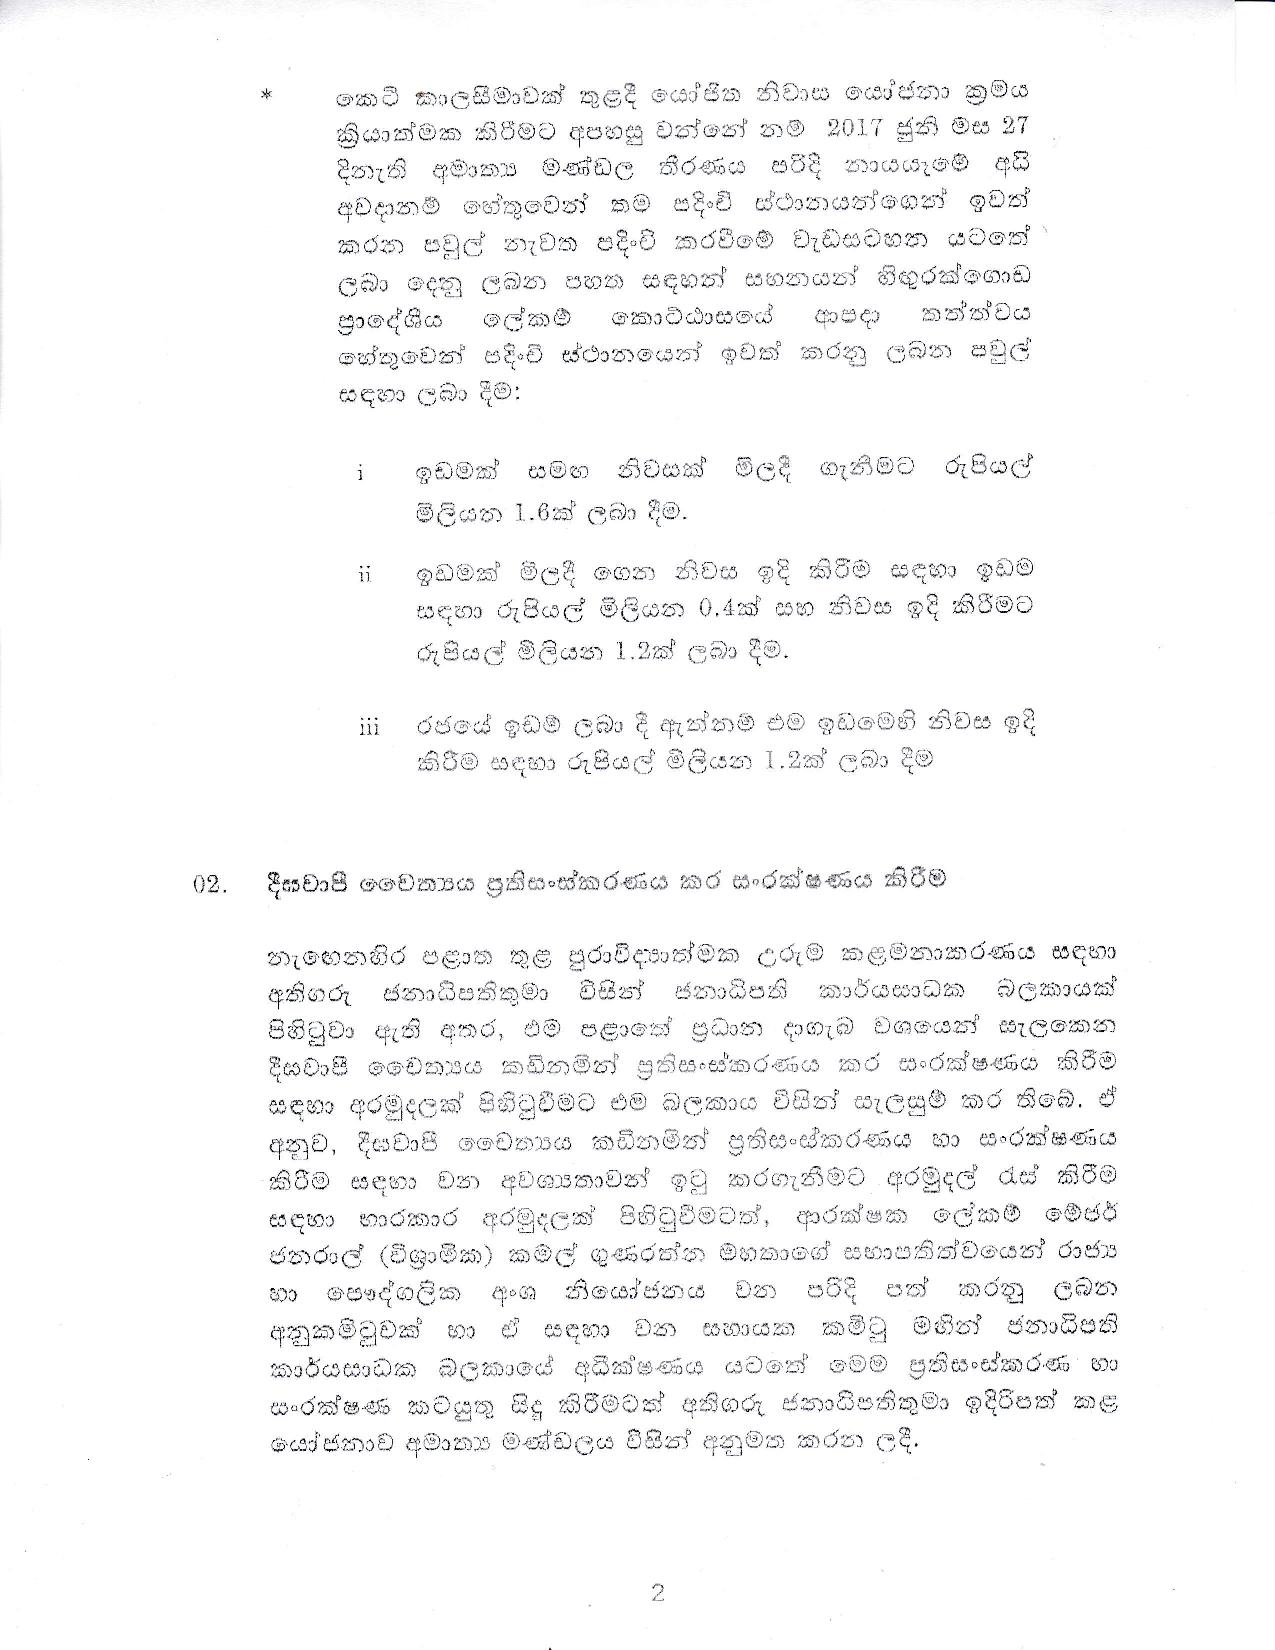 Cabinet Decision on 28.09.2020 page 002